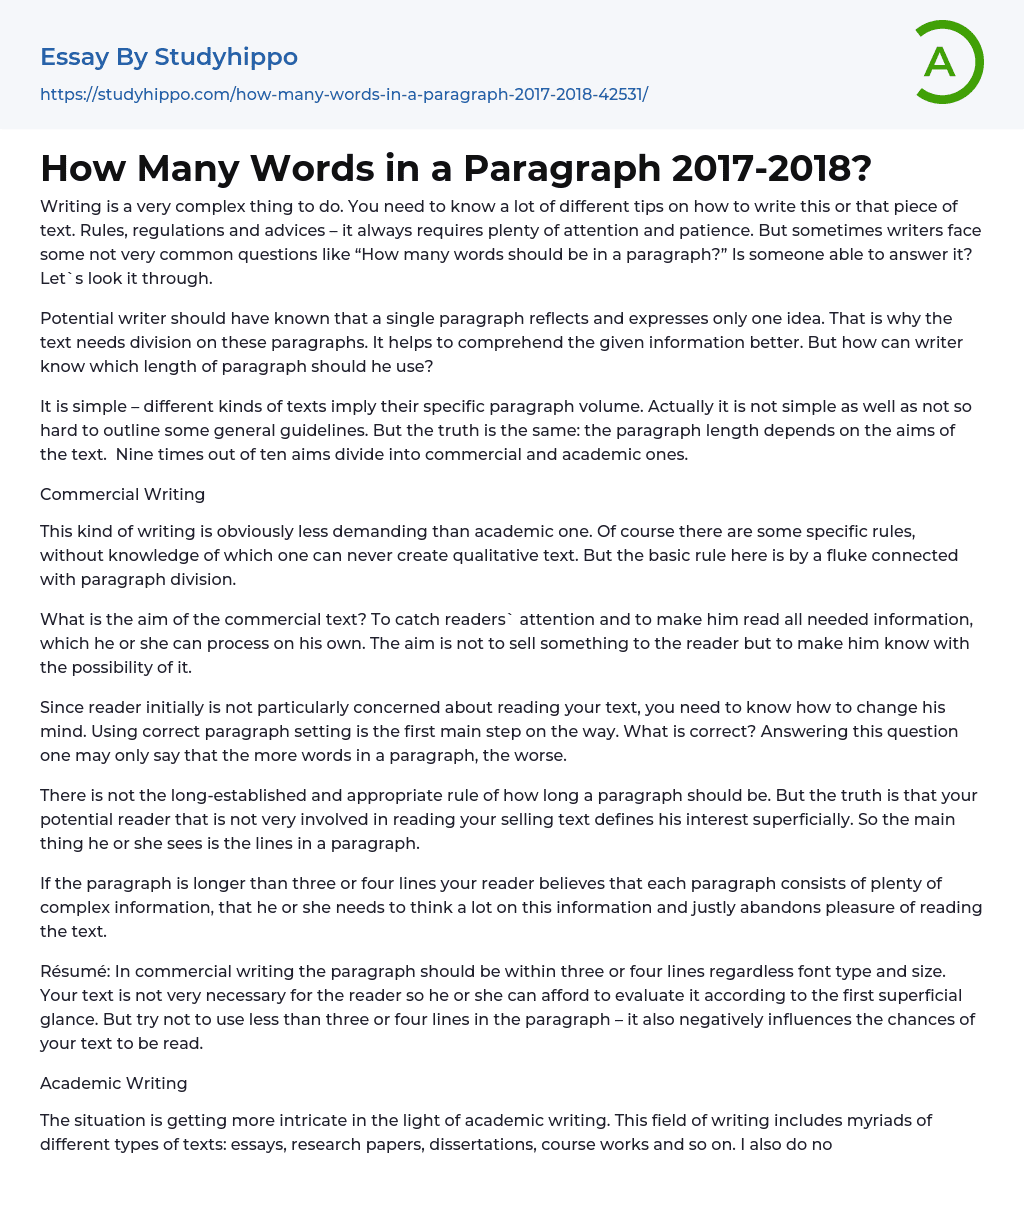 How Many Words in a Paragraph 2017-2018? Essay Example